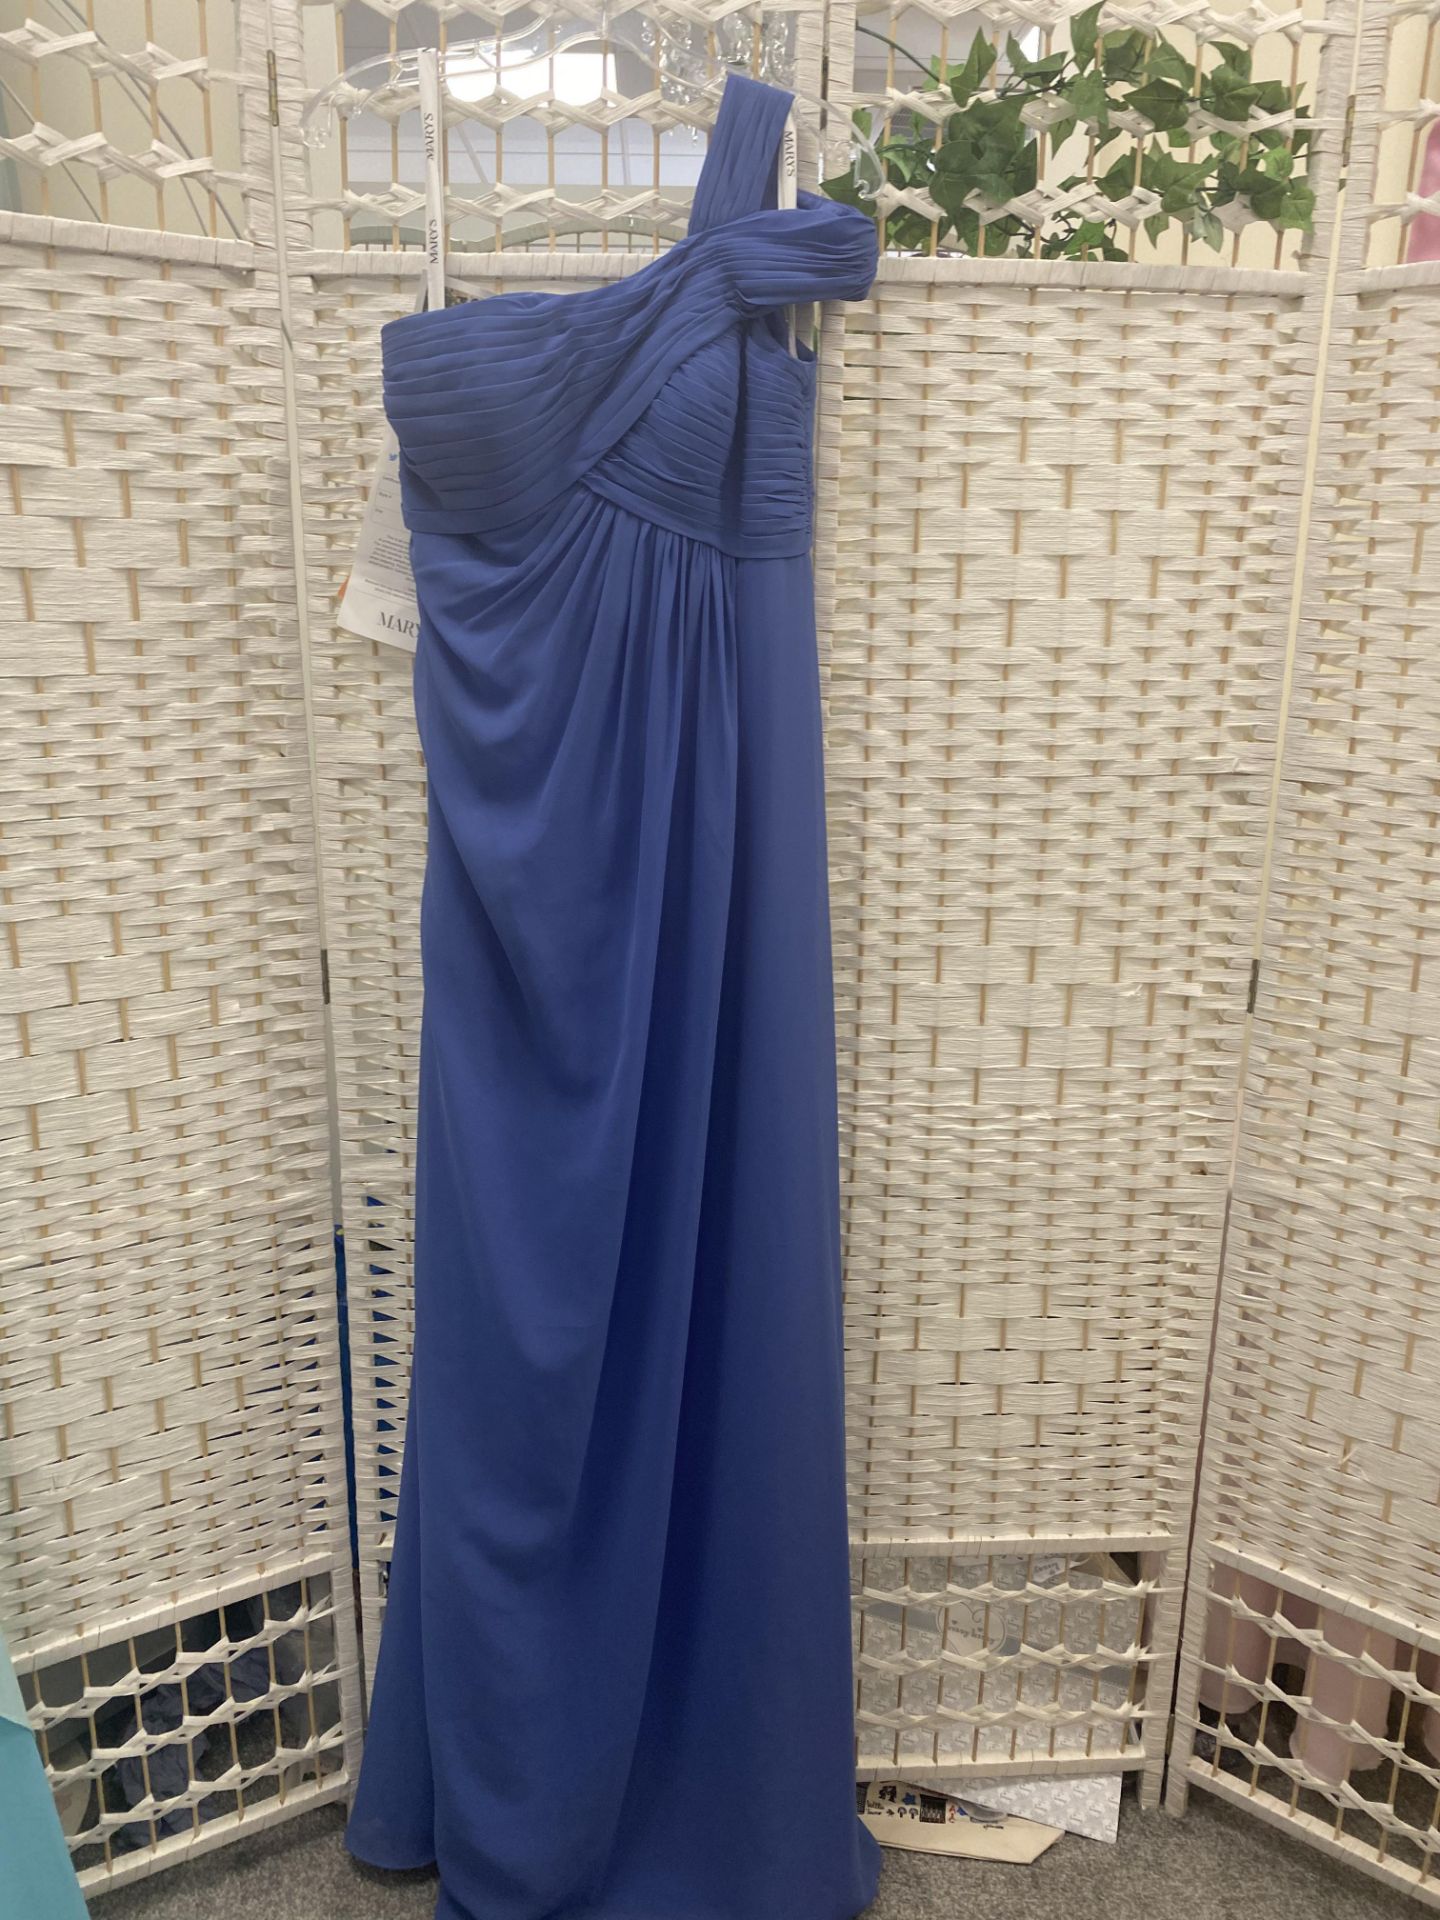 Mary's Bridal Style 7050 Size 10 Mediterranean Blue - Image 5 of 7